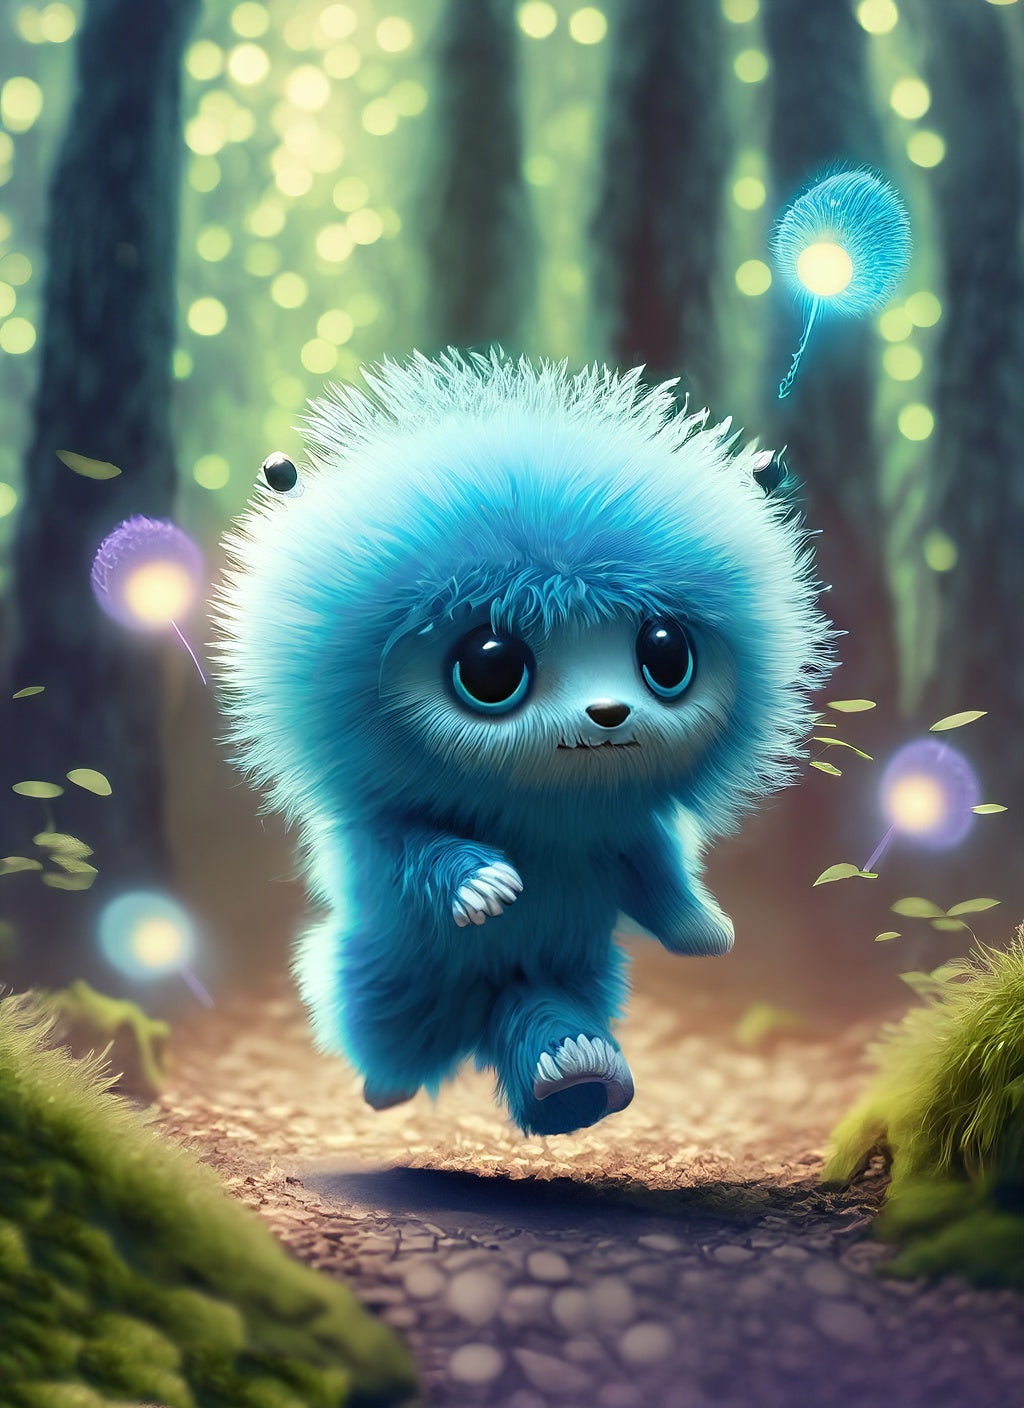 Fluffy Blue Cute Animal Running in A Magical Forest Digital Painting Art Print